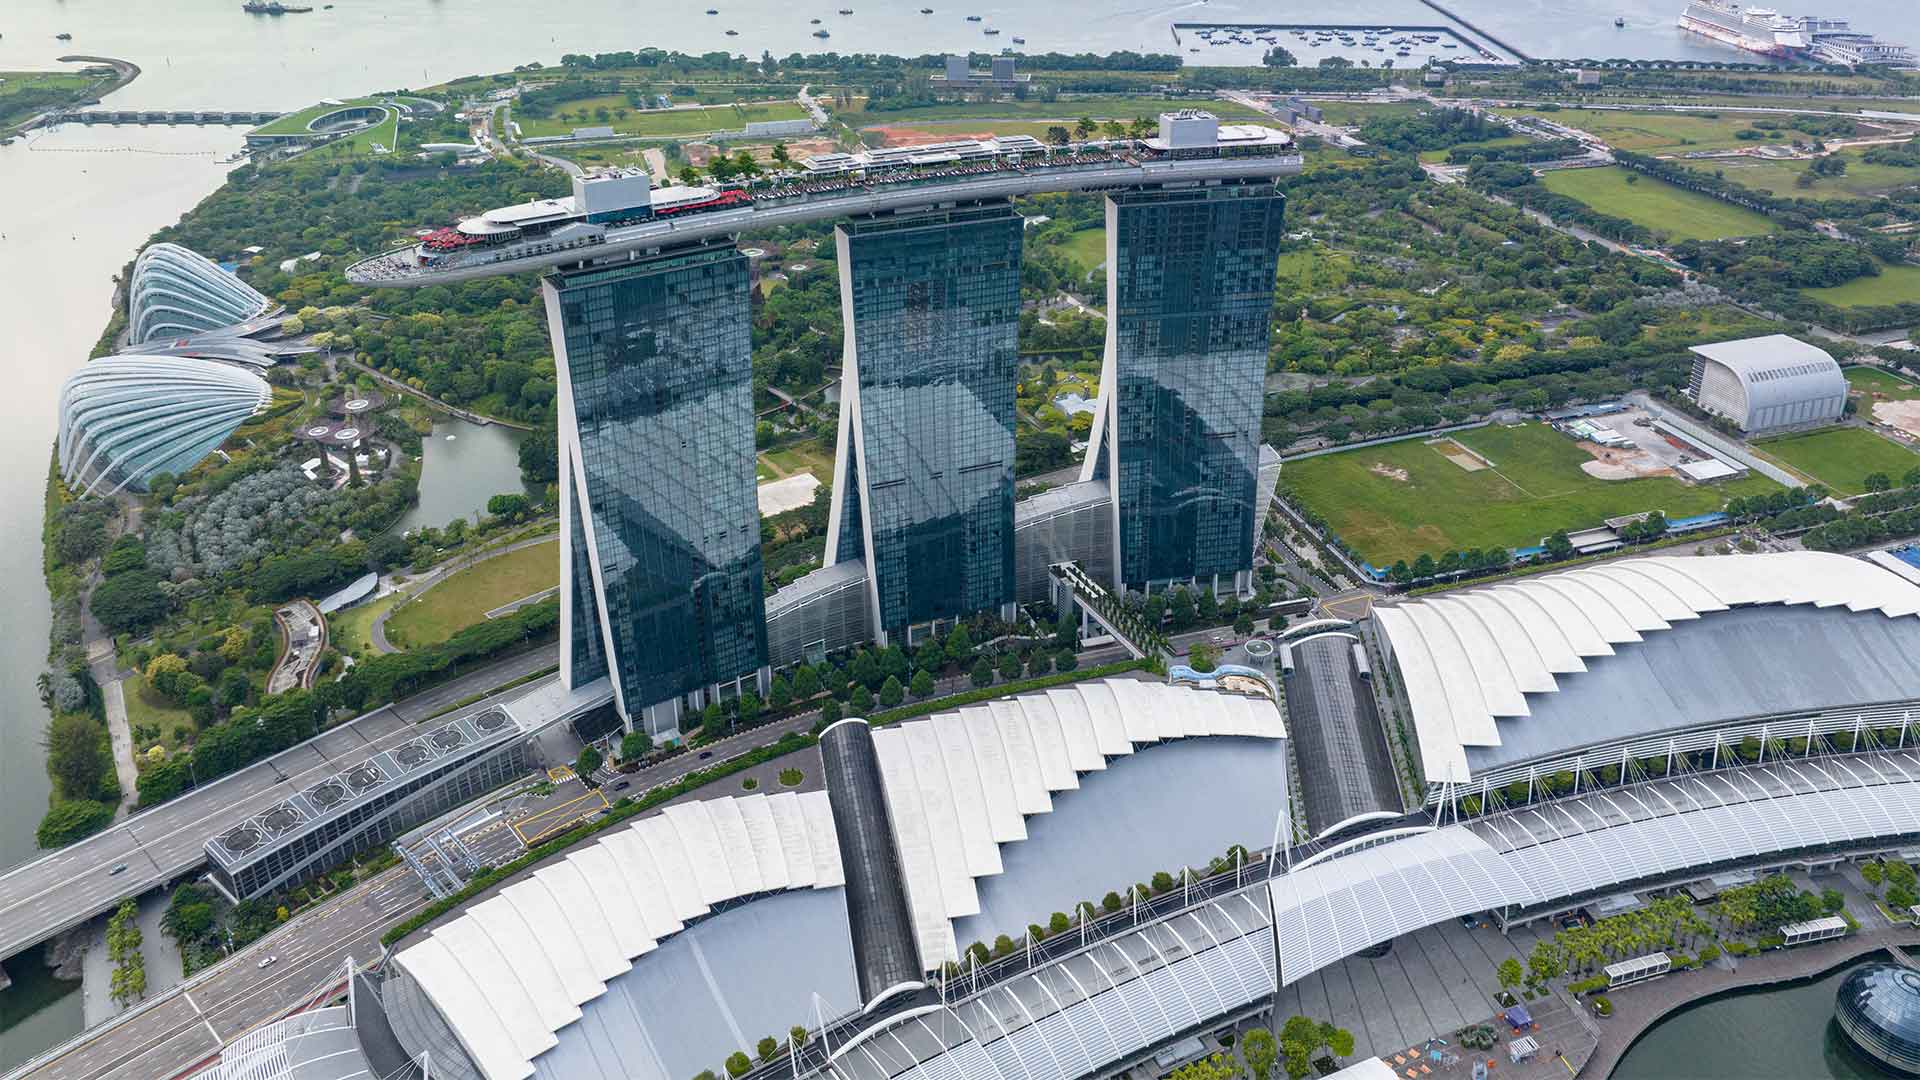 Overview of the property of Marina Bay Sands, Singapore